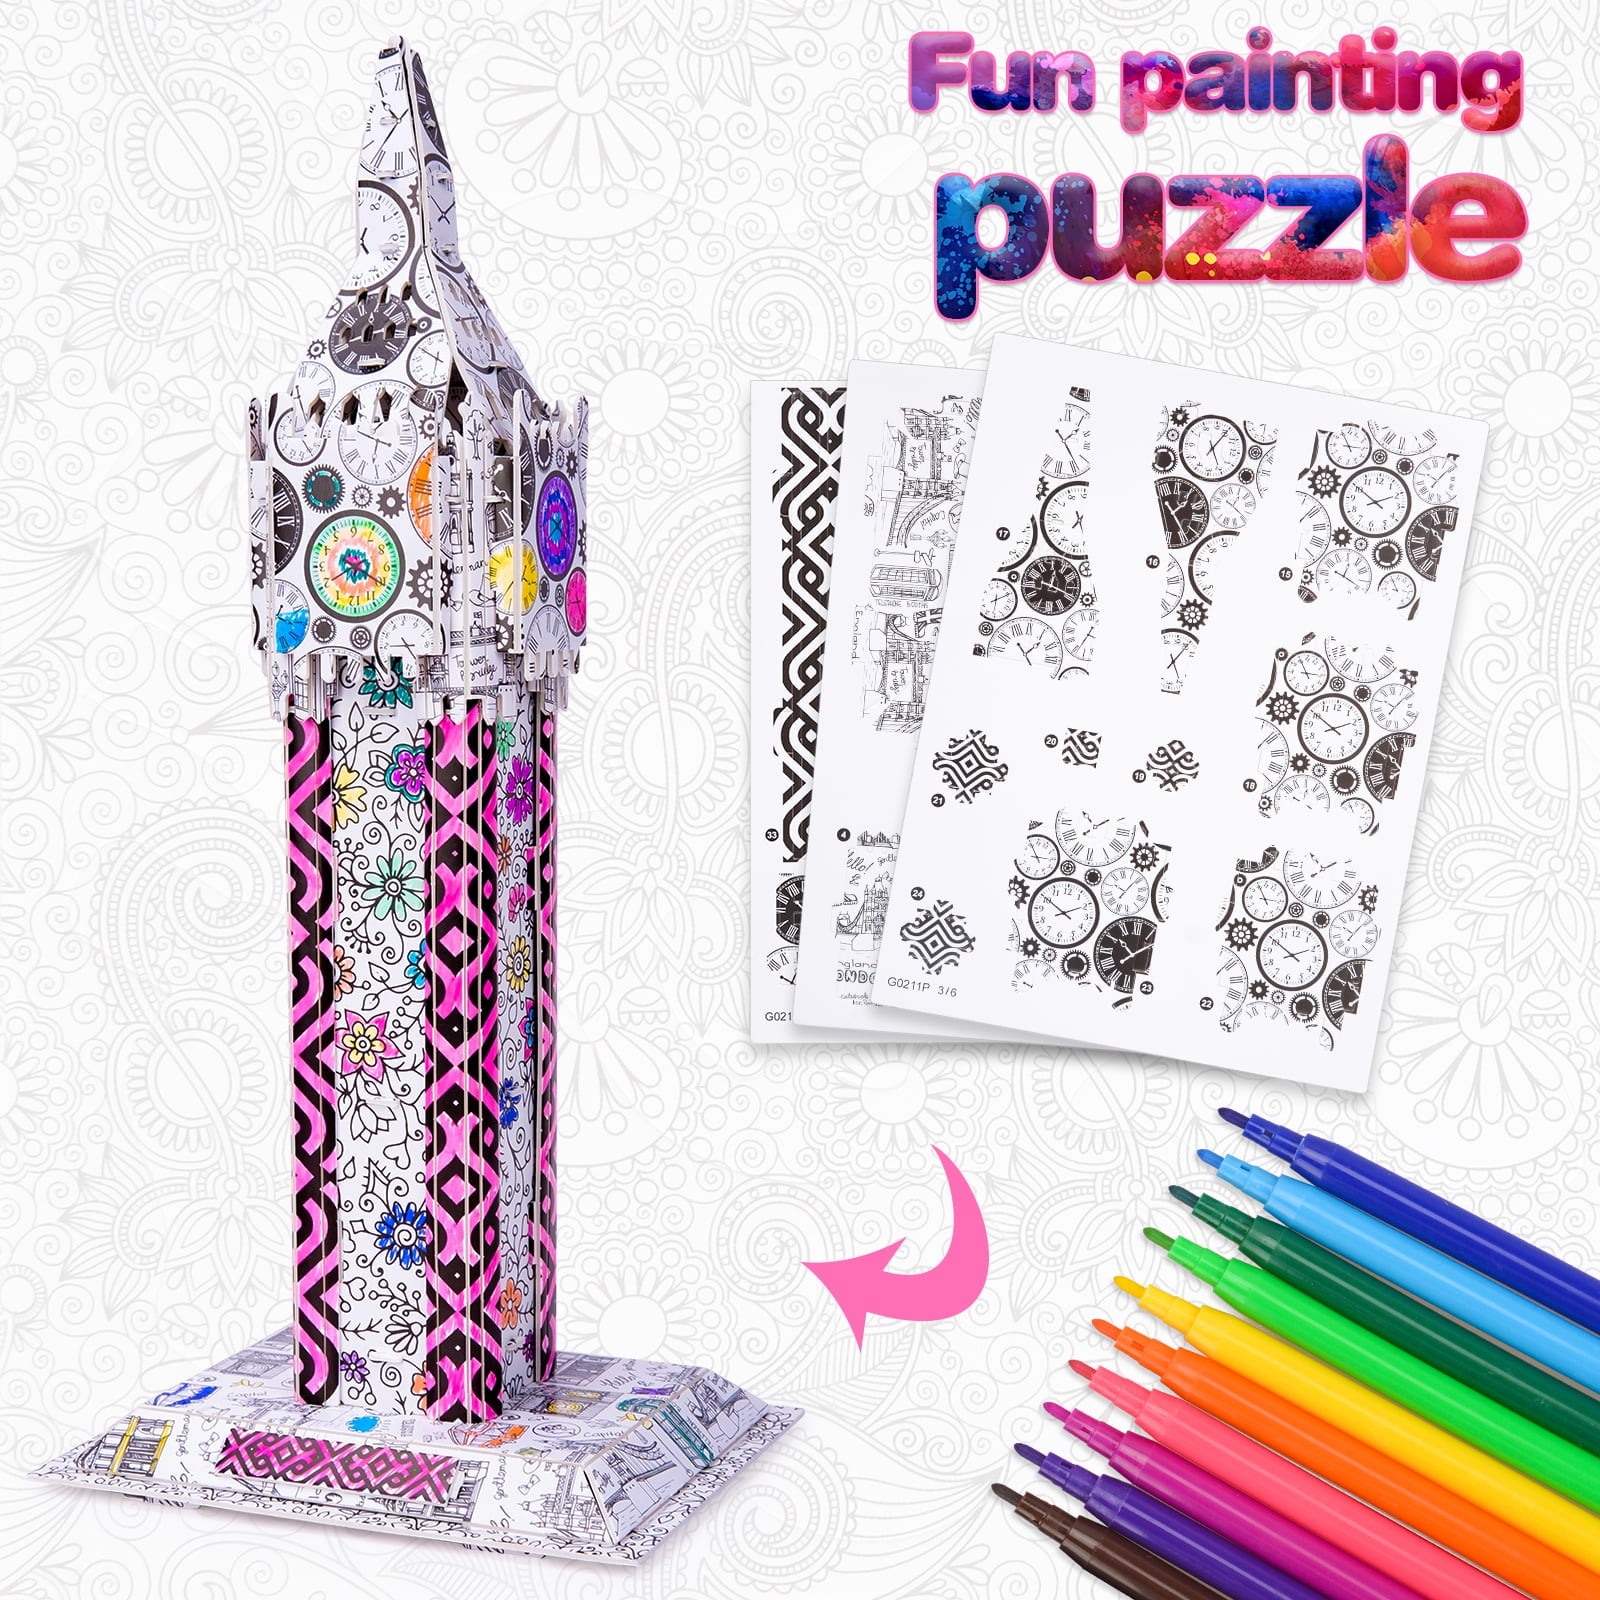 GirlZone Ultimate Art Set for Girls, 118-Piece Awesome Arts and Crafts Kit  for Kids, Fun Girls Toys Age 7+ 